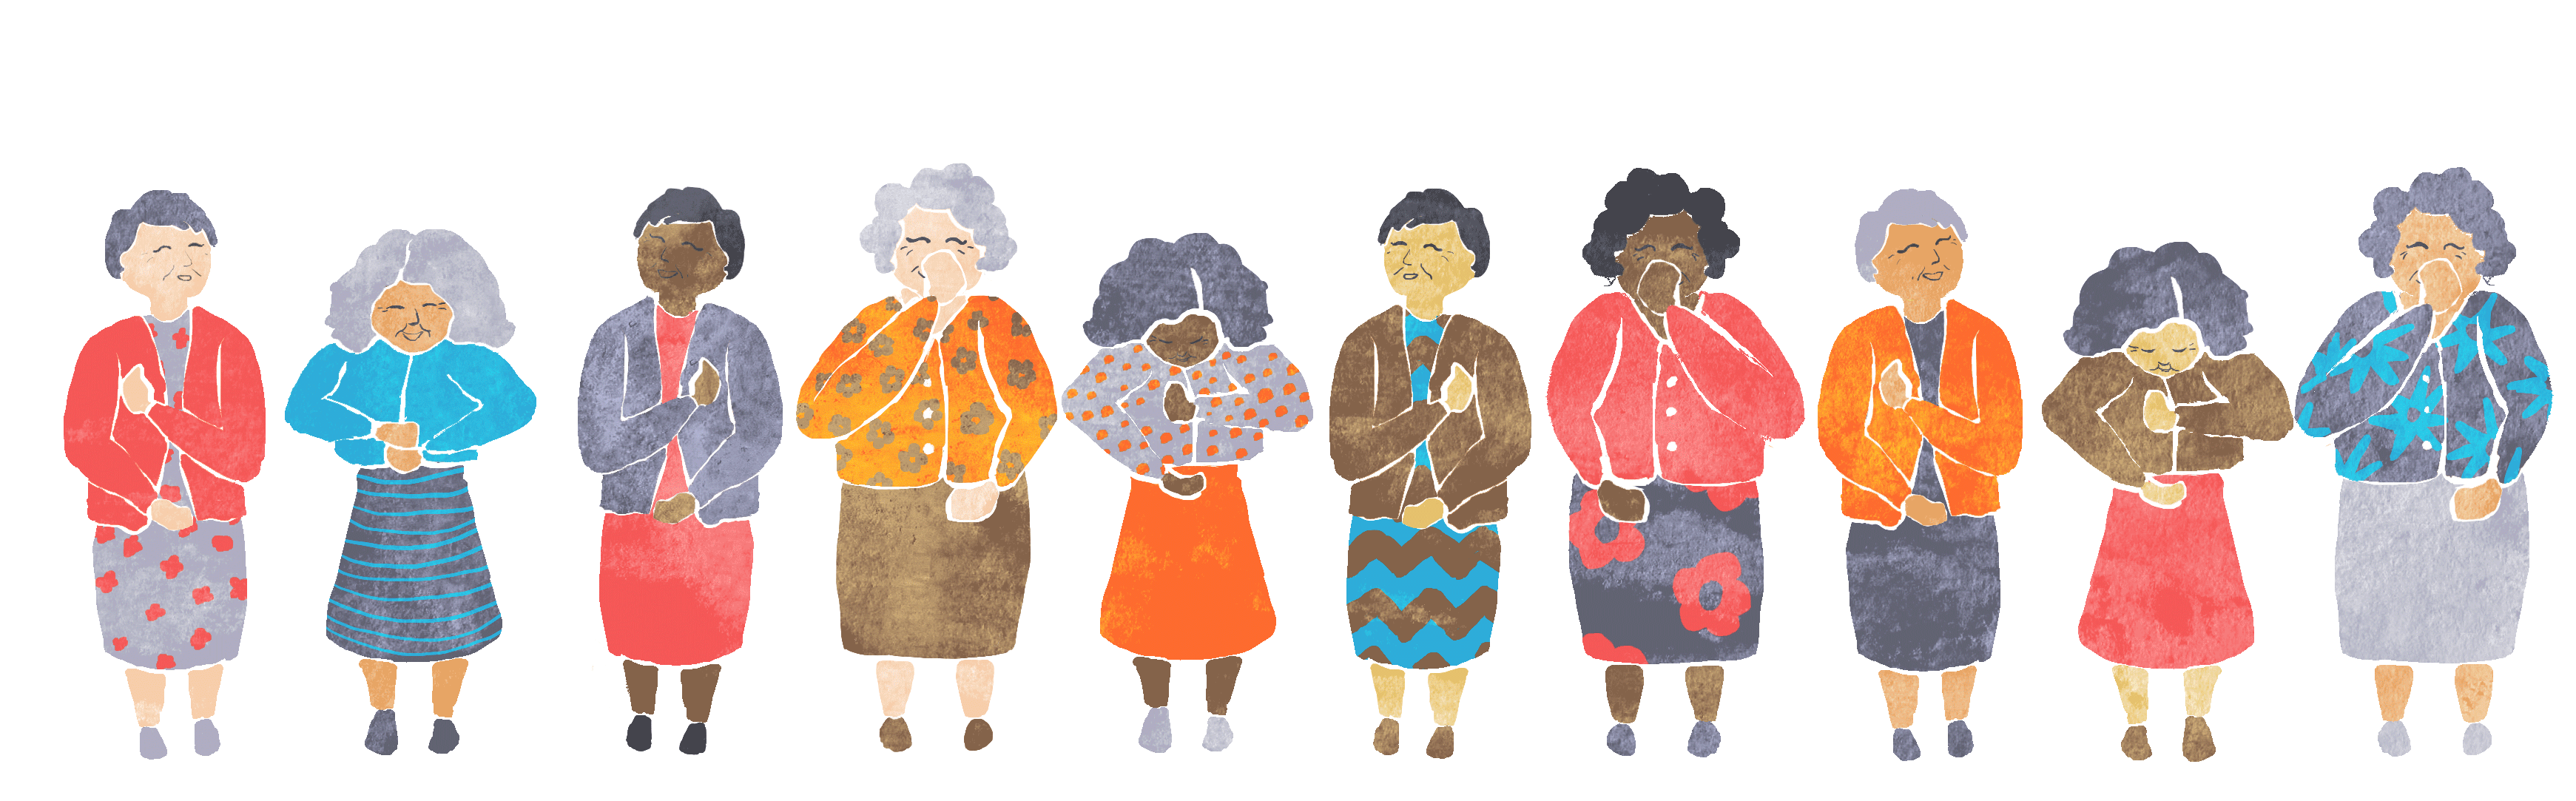 Animation of ten little laughing ladies